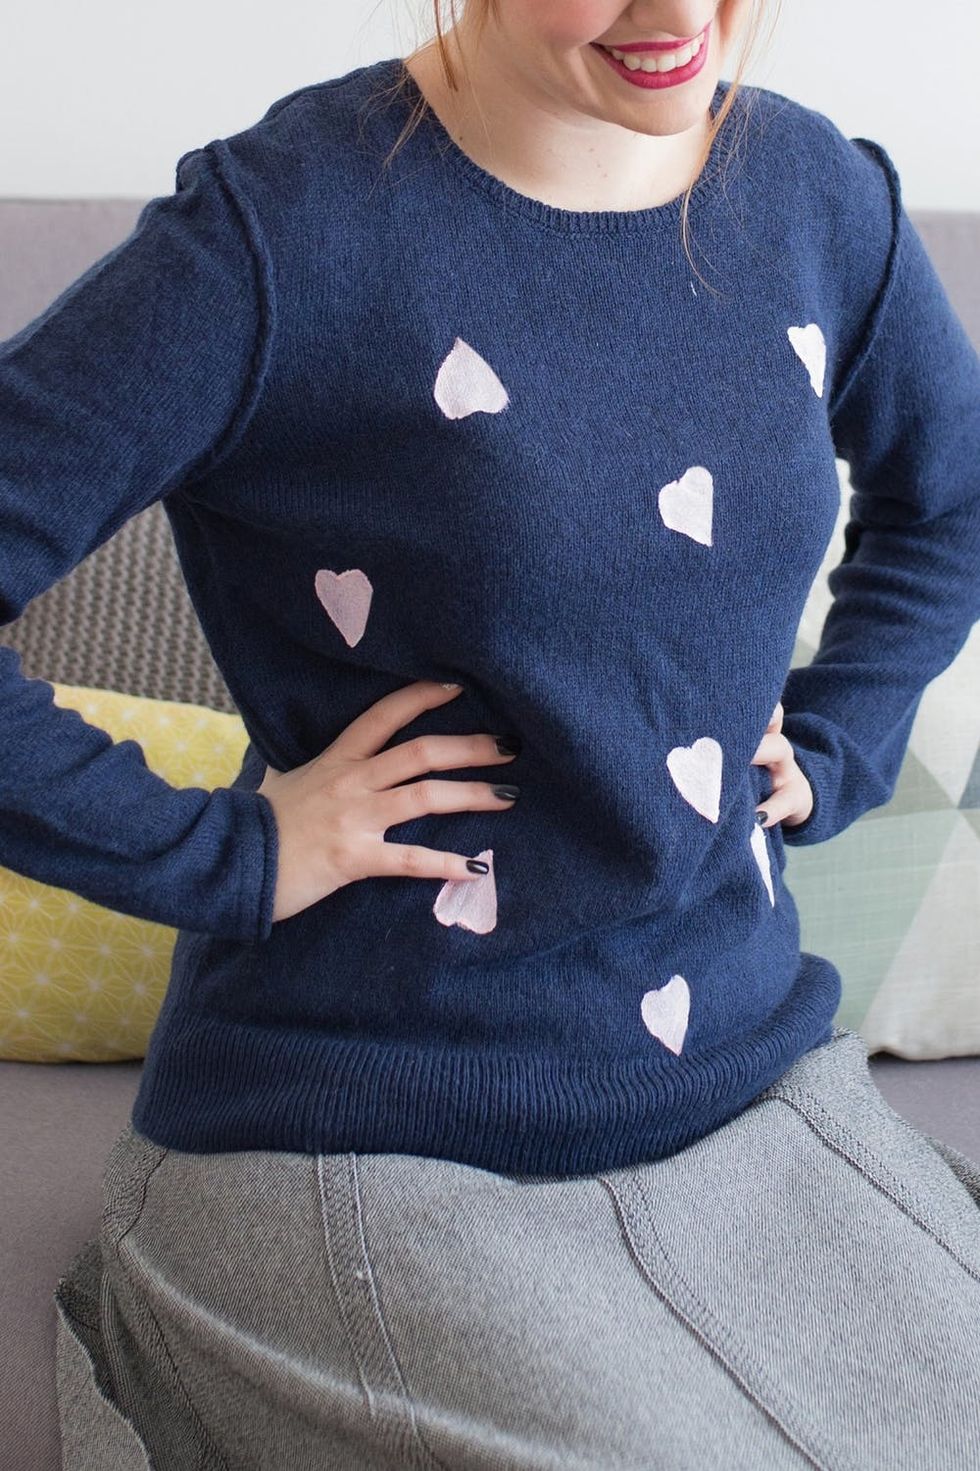 Valentine's Sweater - Reese Witherspoon outfit_0010